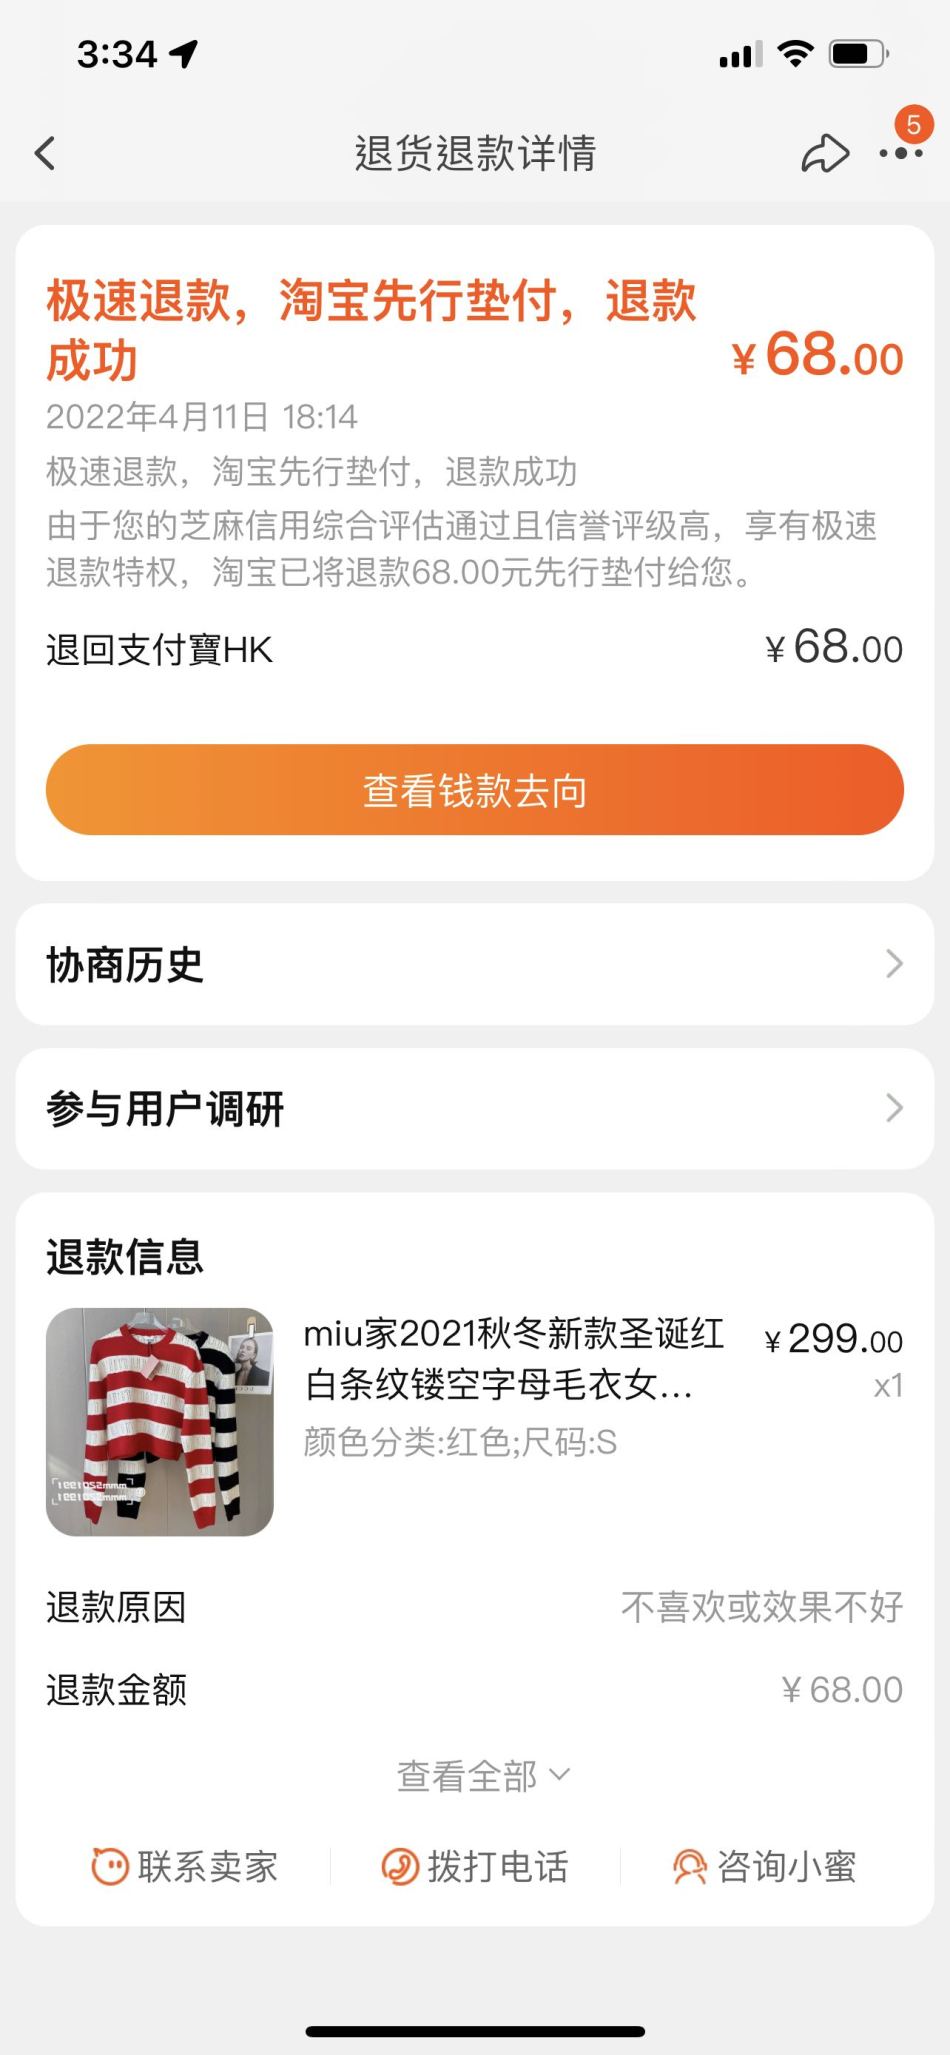 https://img1.superbuy.com/images/consult/2022/05/10/23ce842dd7760893c26f84fc58d84fab.jpg?x-oss-process=image/resize,w_950